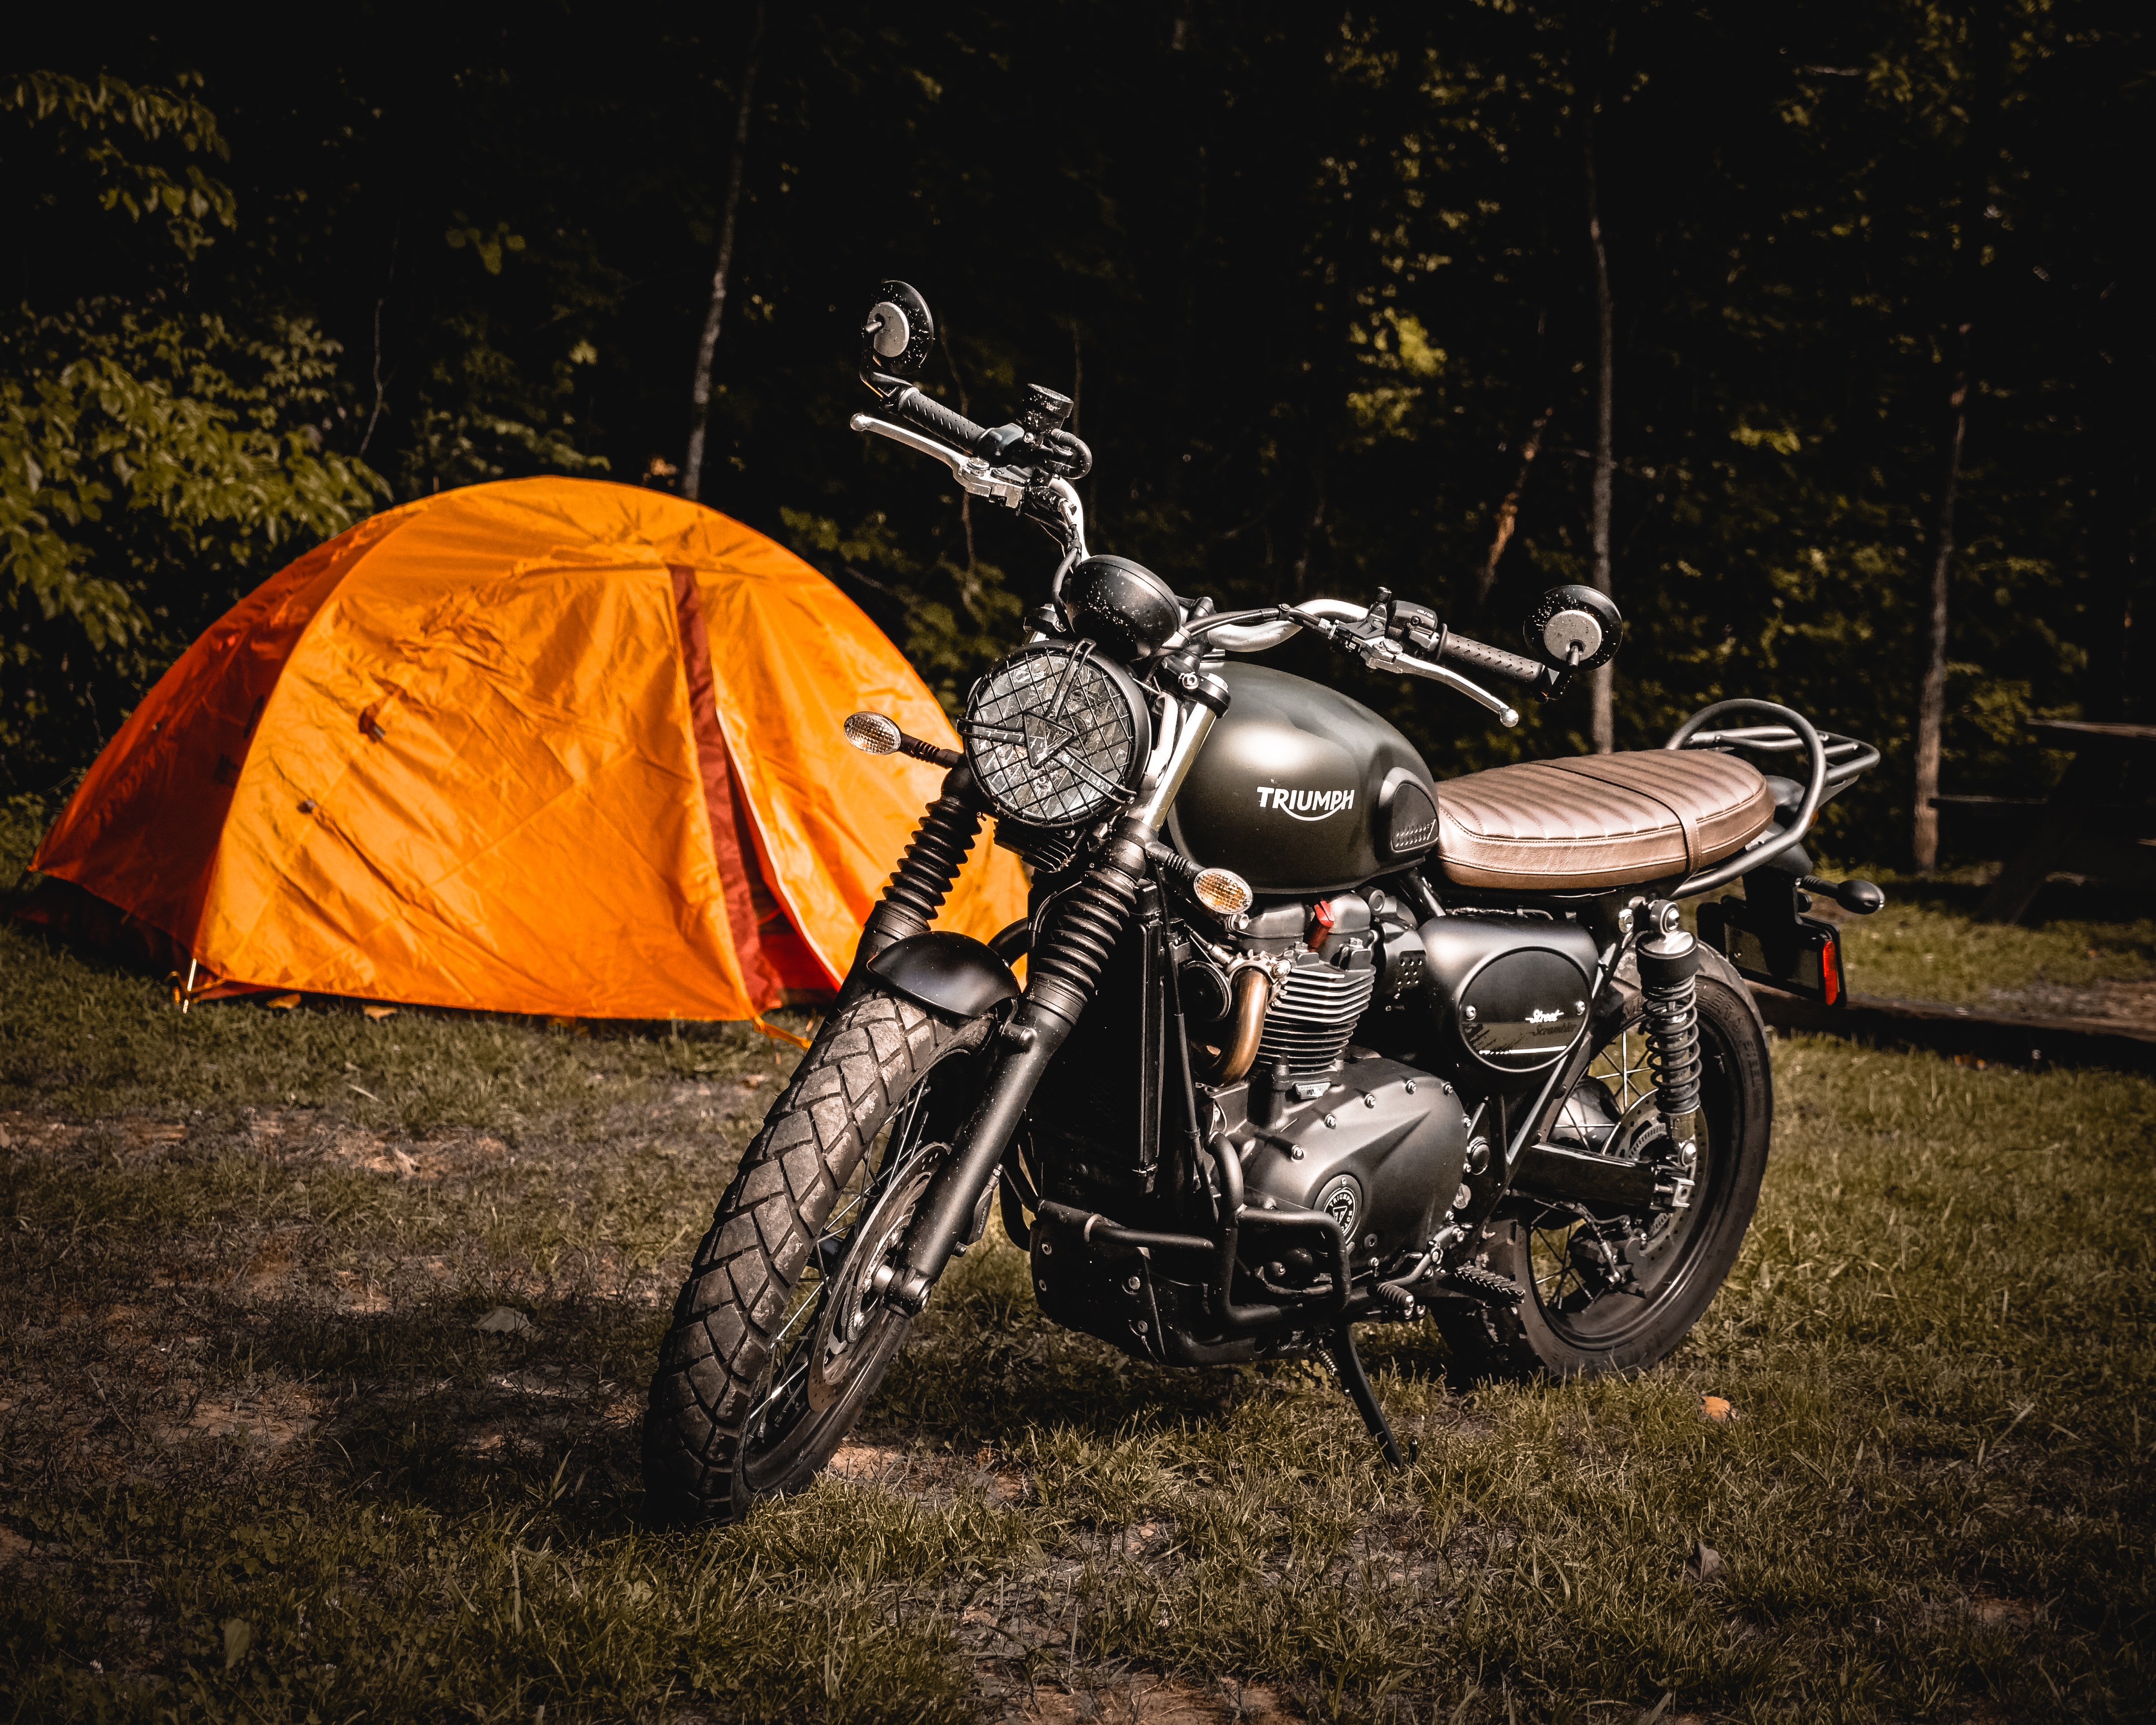 Download wallpaper 4860x3888 motorcycle, tent, grass hd background